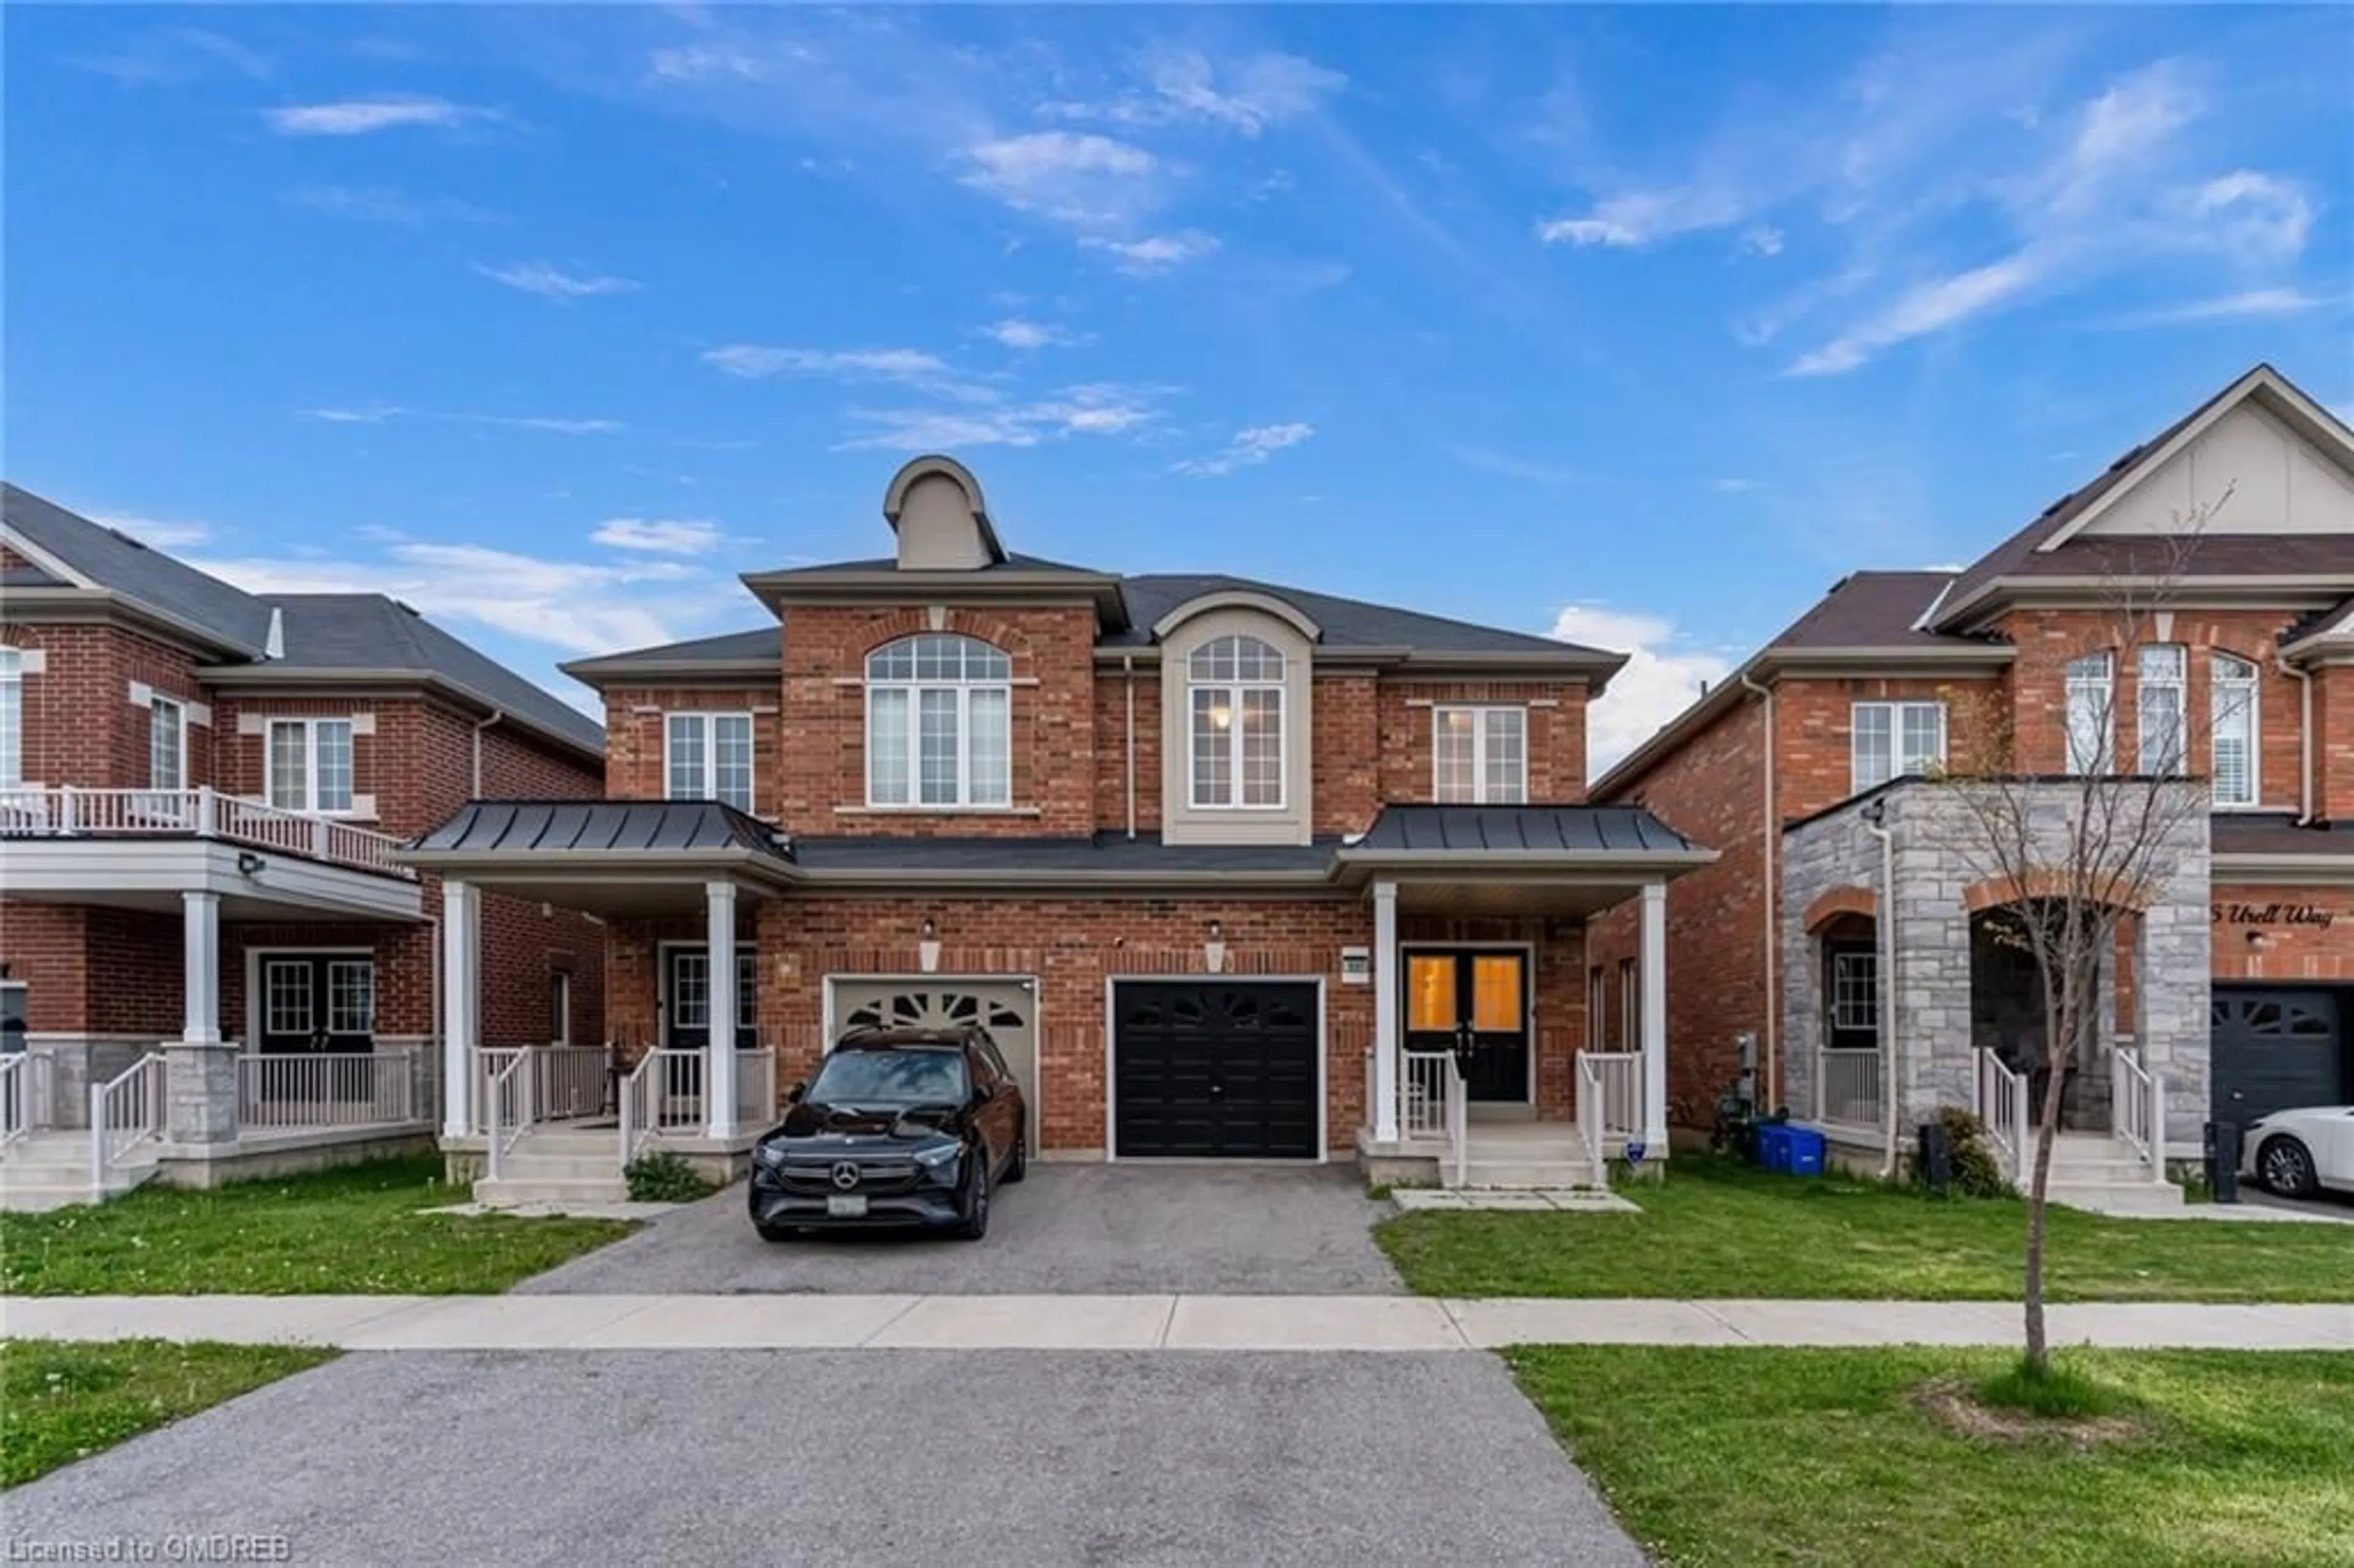 Home with brick exterior material for 1081 Urell Way, Milton Ontario L9T 8V5